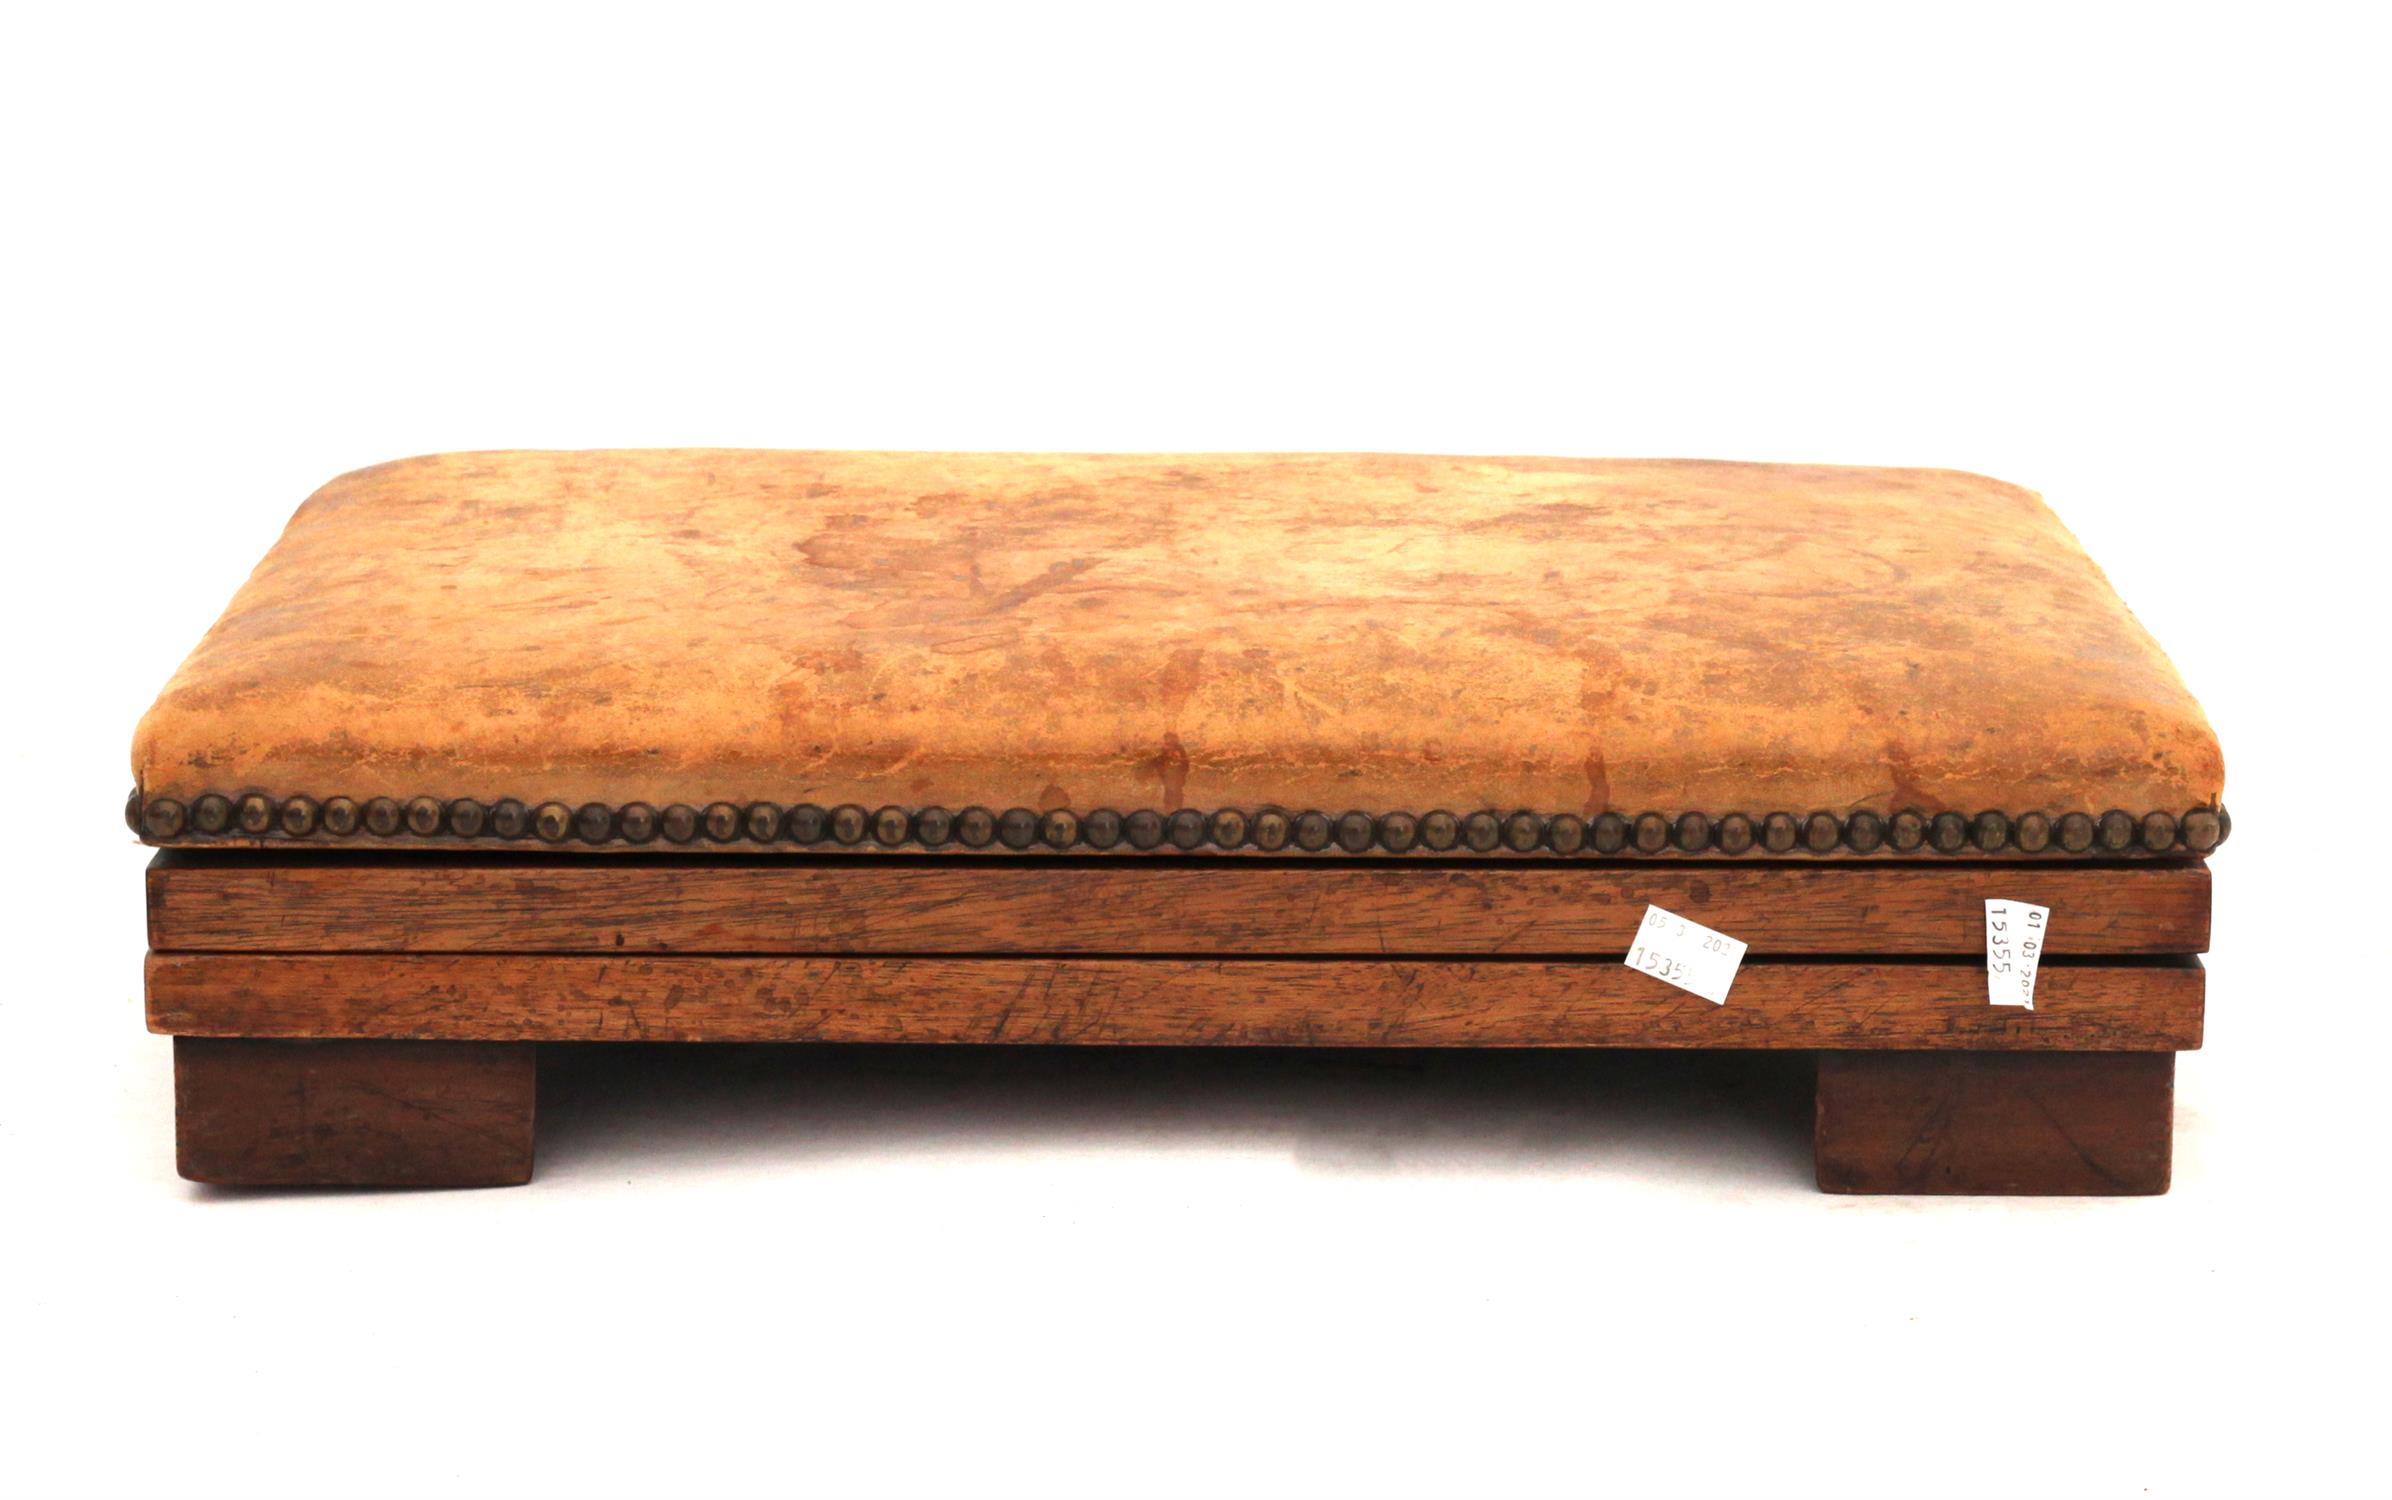 19th century mahogany adjustable footstool with studded leather upholstery, H12 x W51 x D40cm